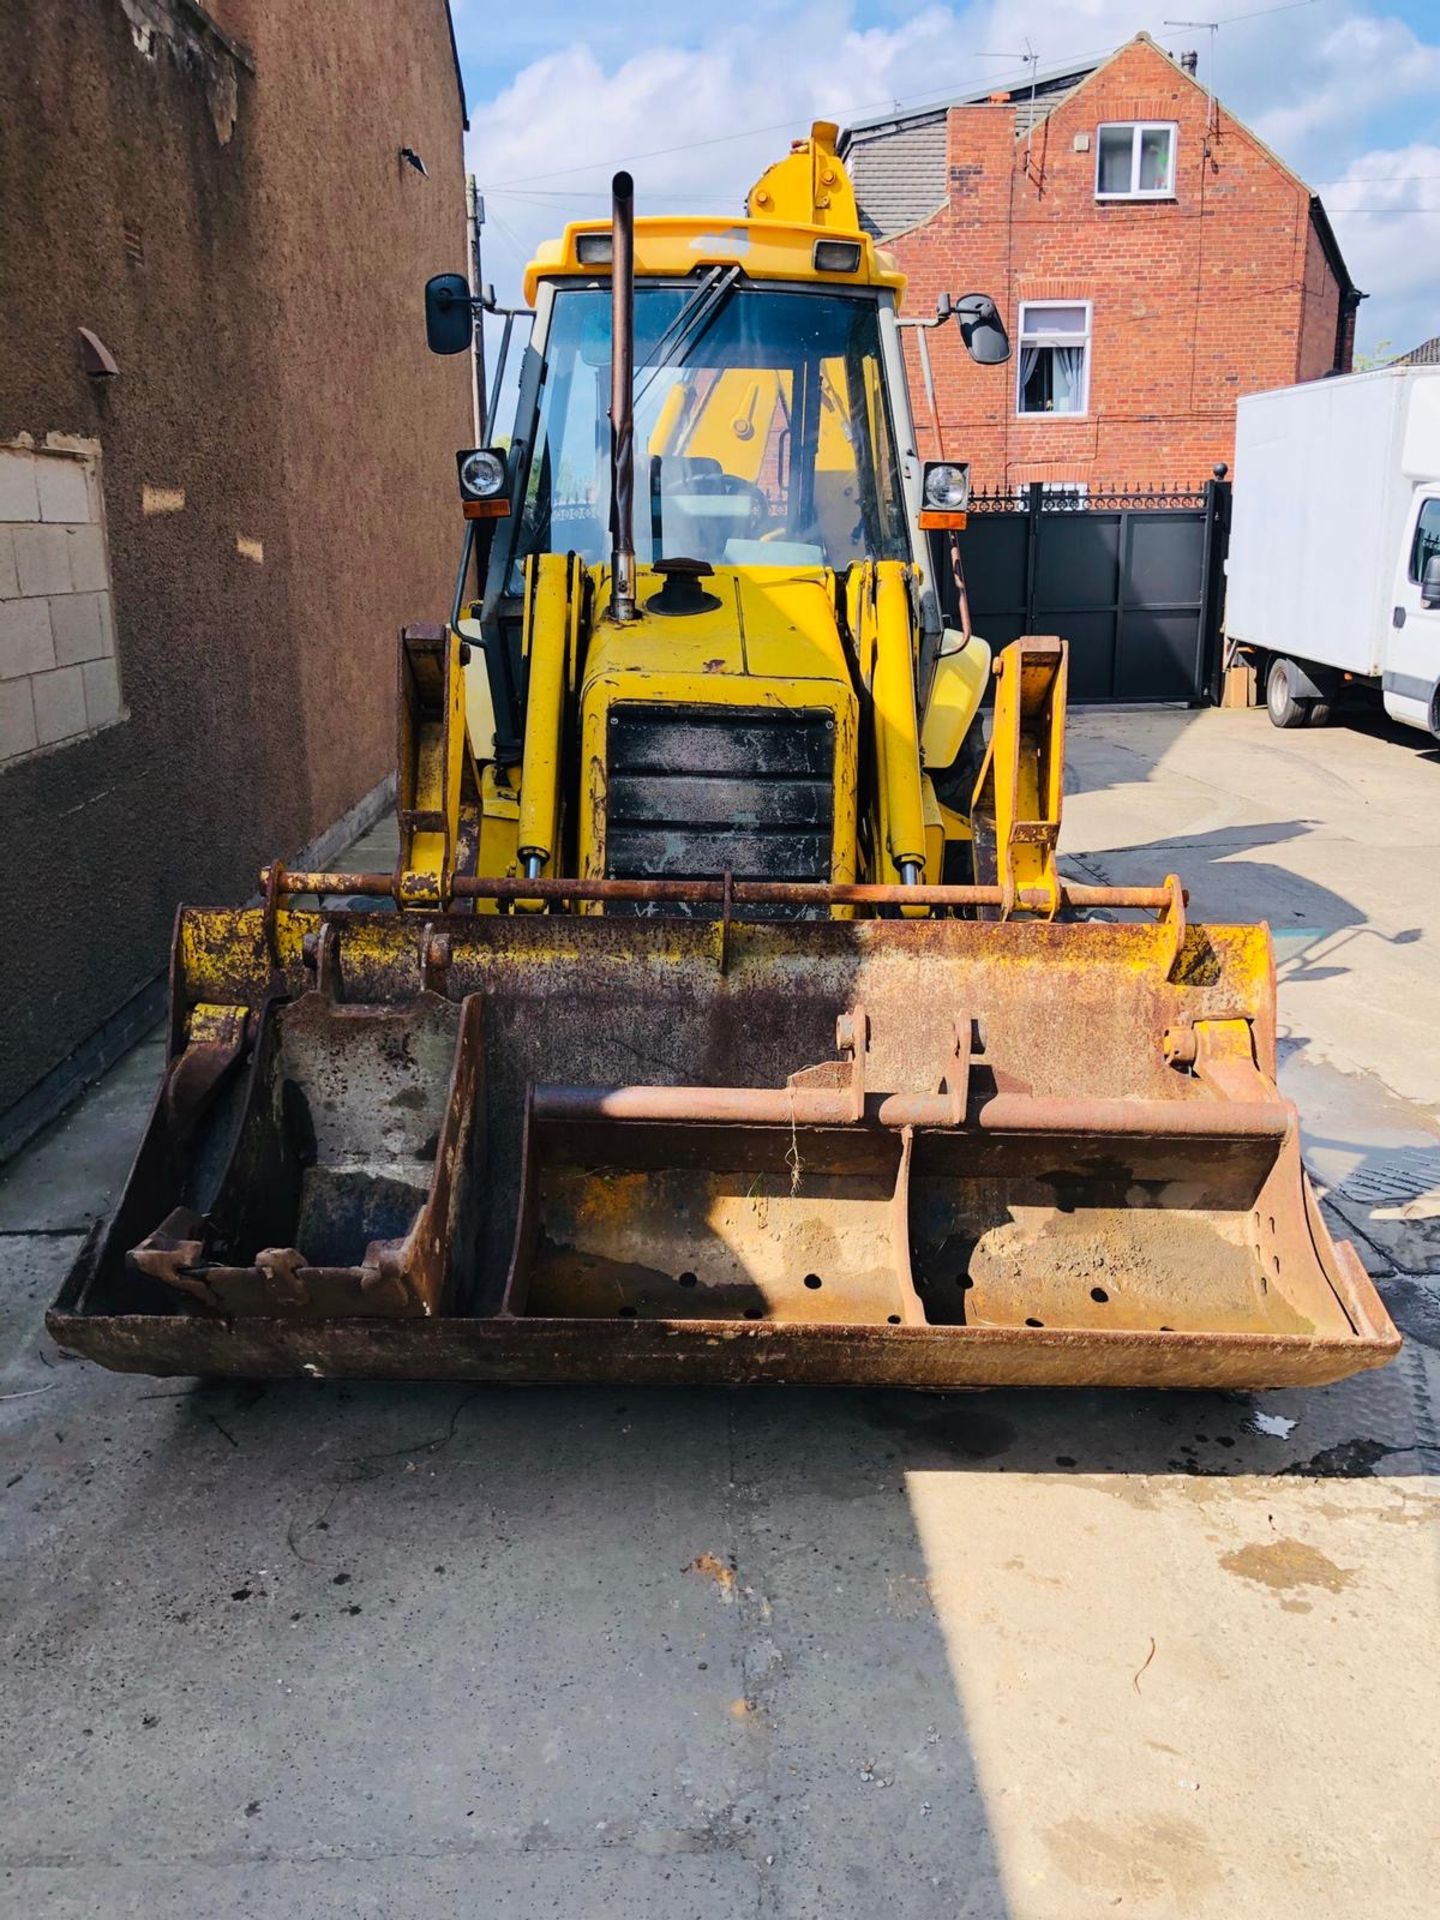 JCB 3CX PROJECT 8 DIGGER, 4X4, EXTRA DIG, C/W 3 BUCKETS, HOURS FROM NEW 7434 ONLY *NO VAT* - Image 2 of 16